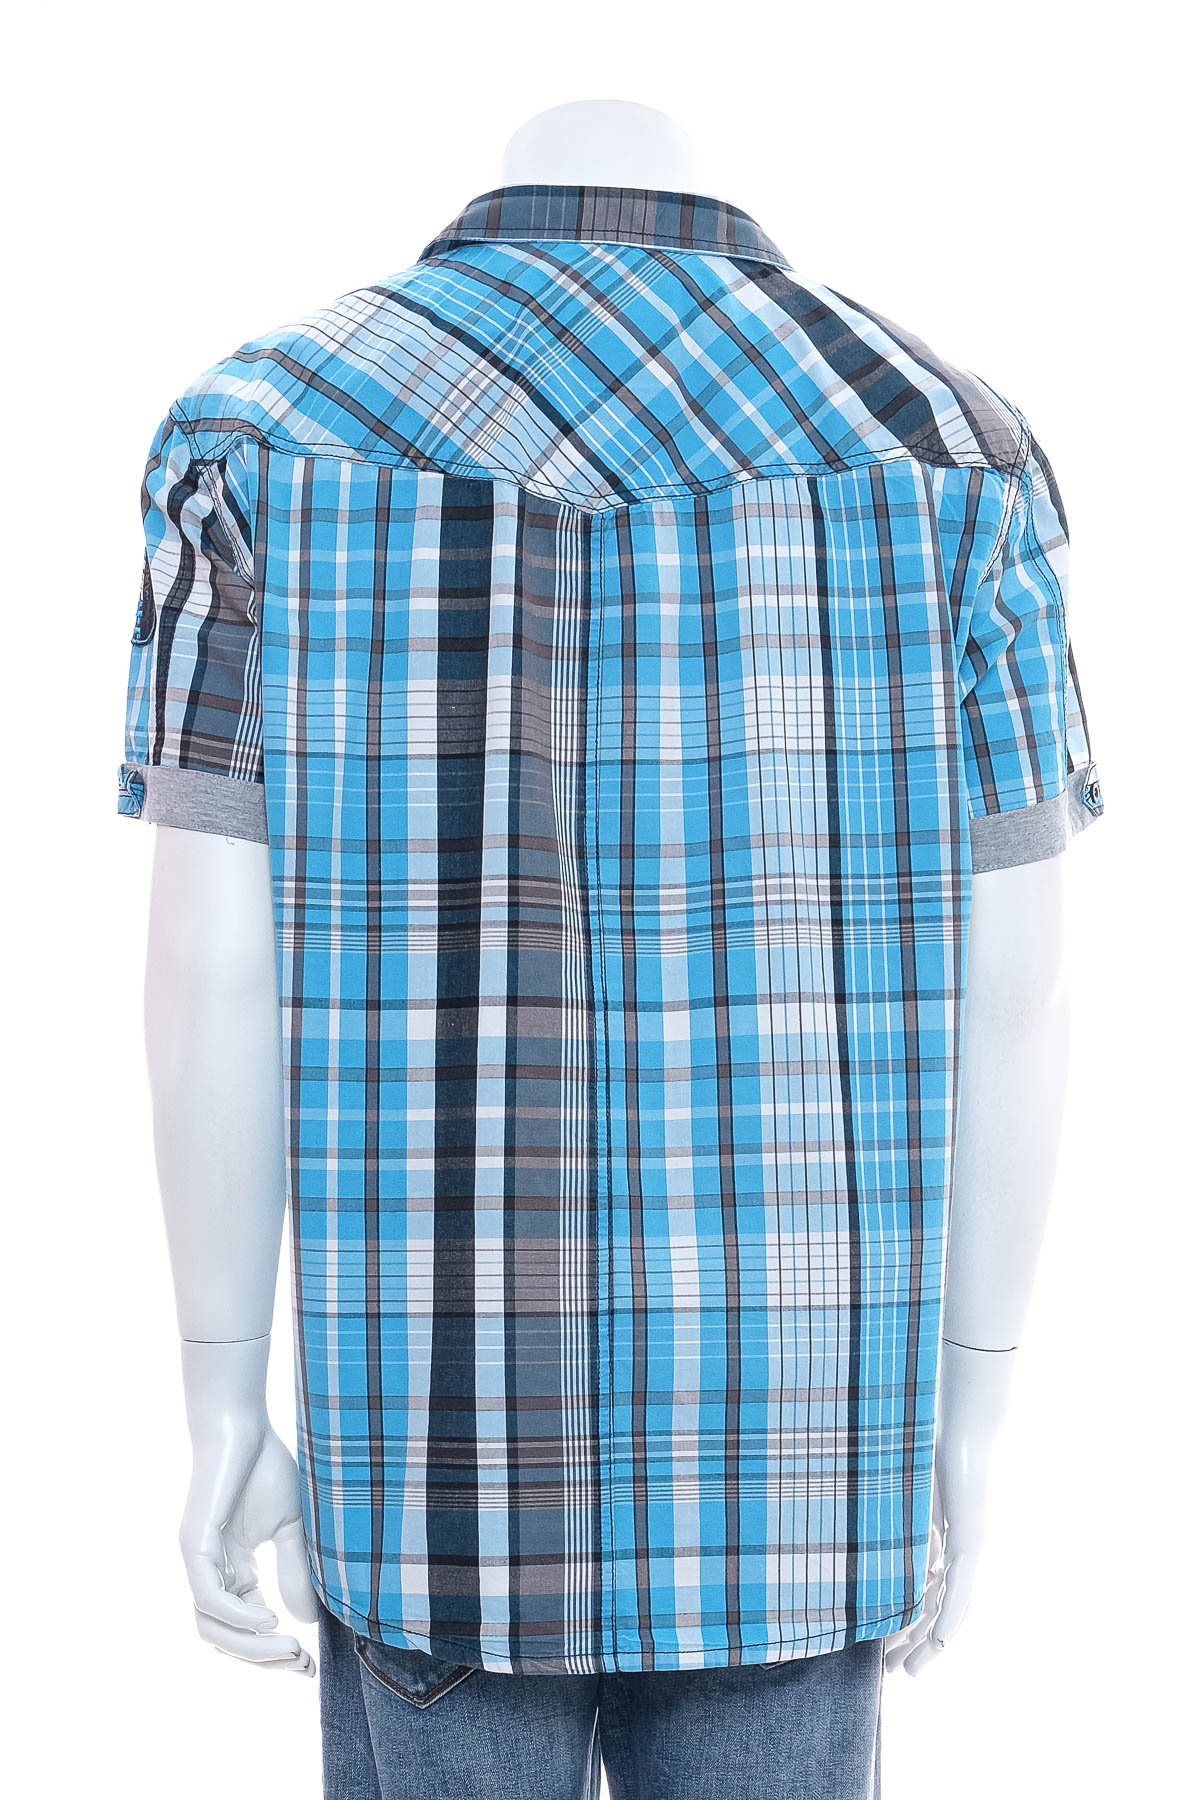 Men's shirt - Area Sixty-Two - 1